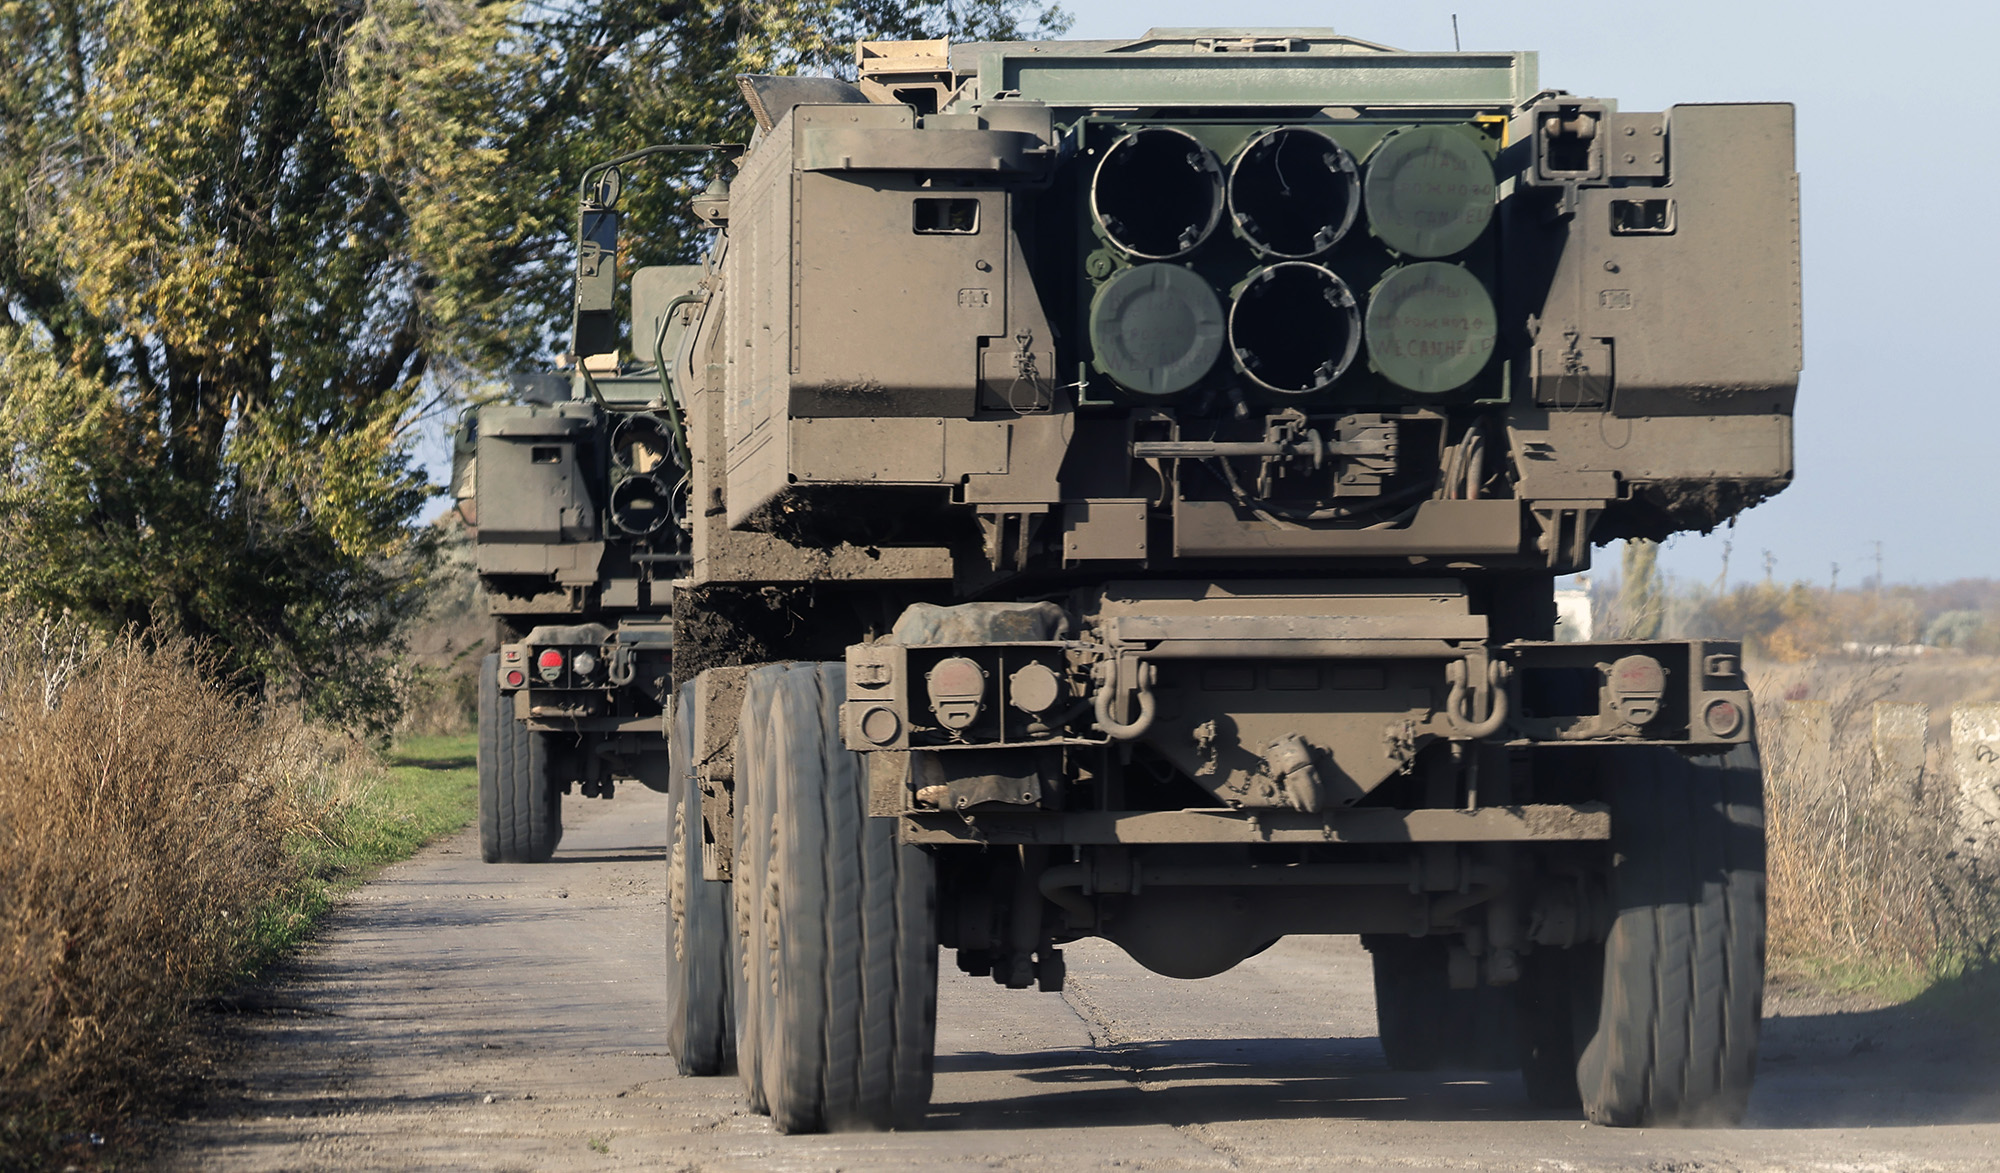 A High Mobility Artillery Rocket System (HIMARS) moves in the northern Kherson region, Ukraine, on October 29.